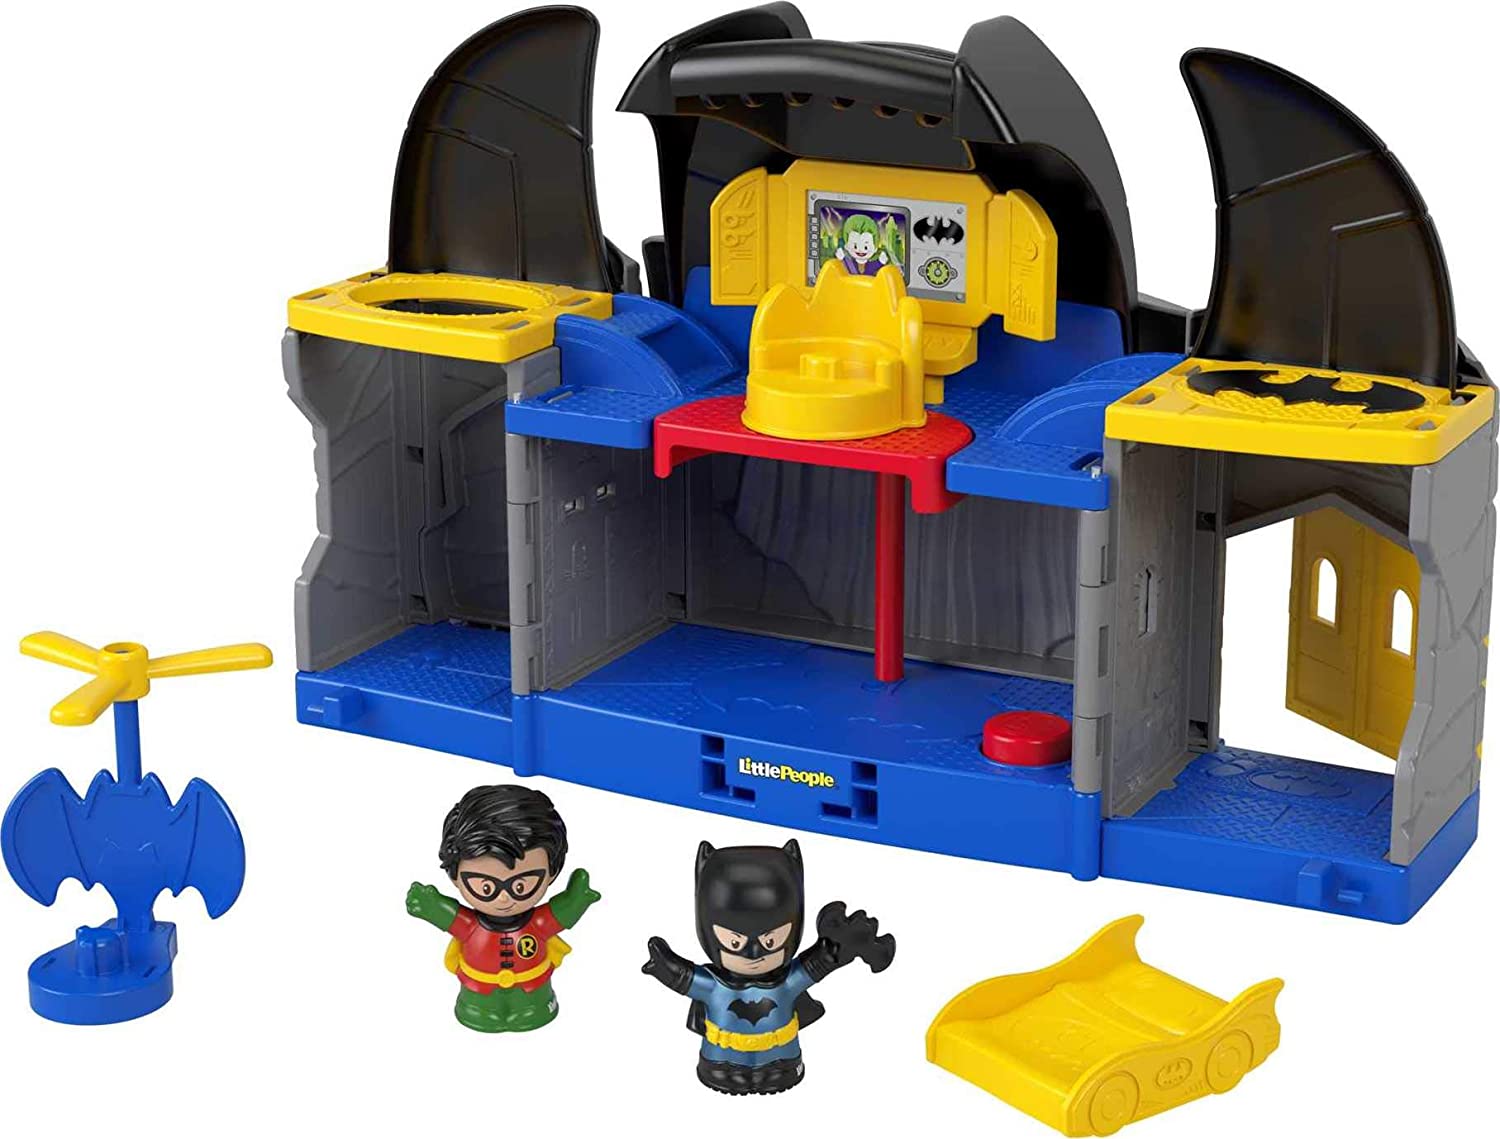 Fisher-Price Little People DC Super Friends Batcave Playset $15 + Free Shipping w/ Amazon Prime or Orders $25+